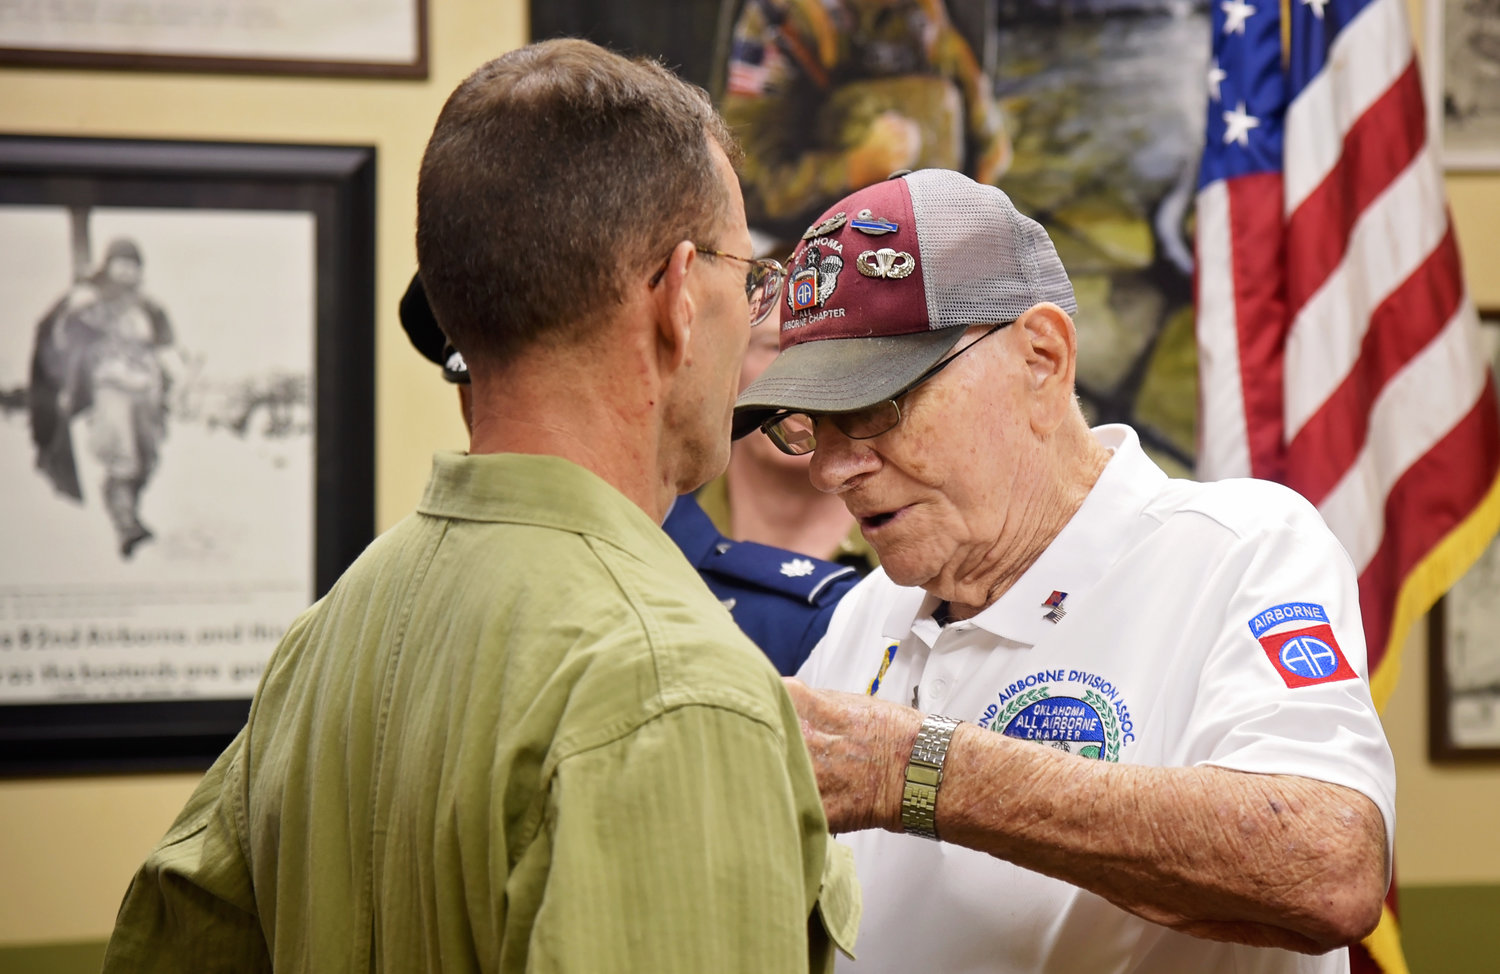 Jerry Ring pins wings on Martin Lockhart at the wing pinning ceremony held July 23, 2022.